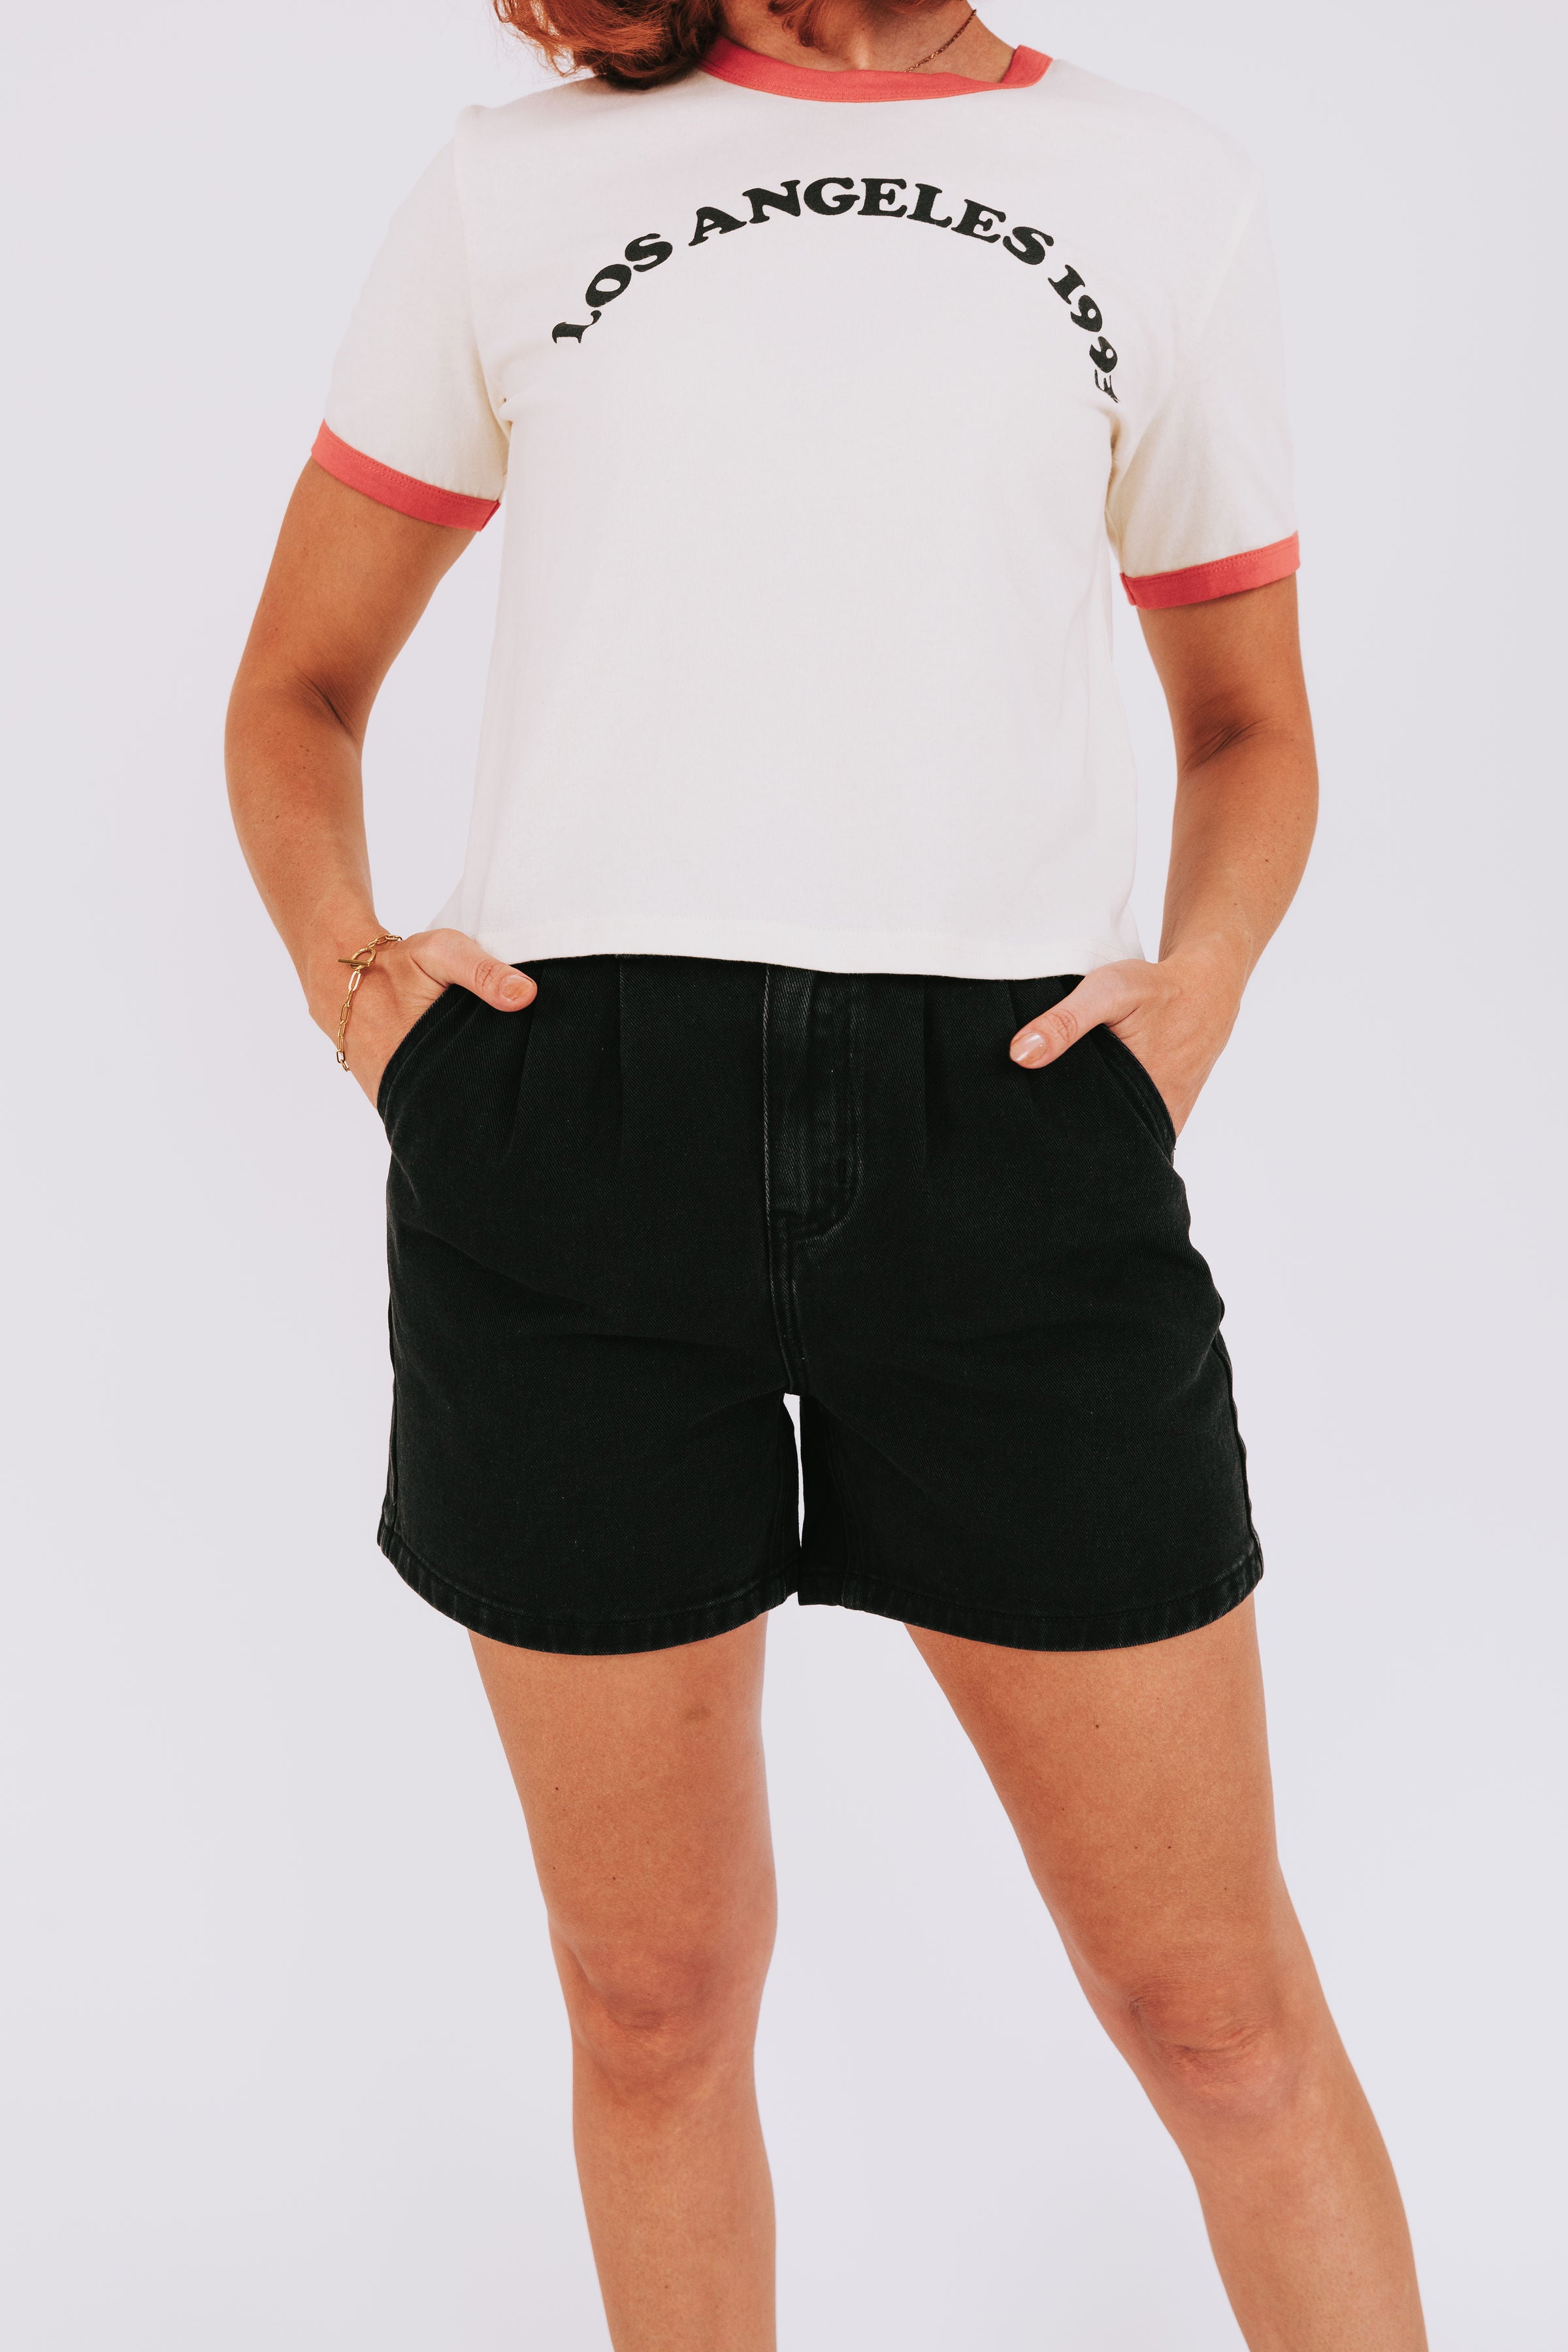 Campground Shorts - 2 Colors!